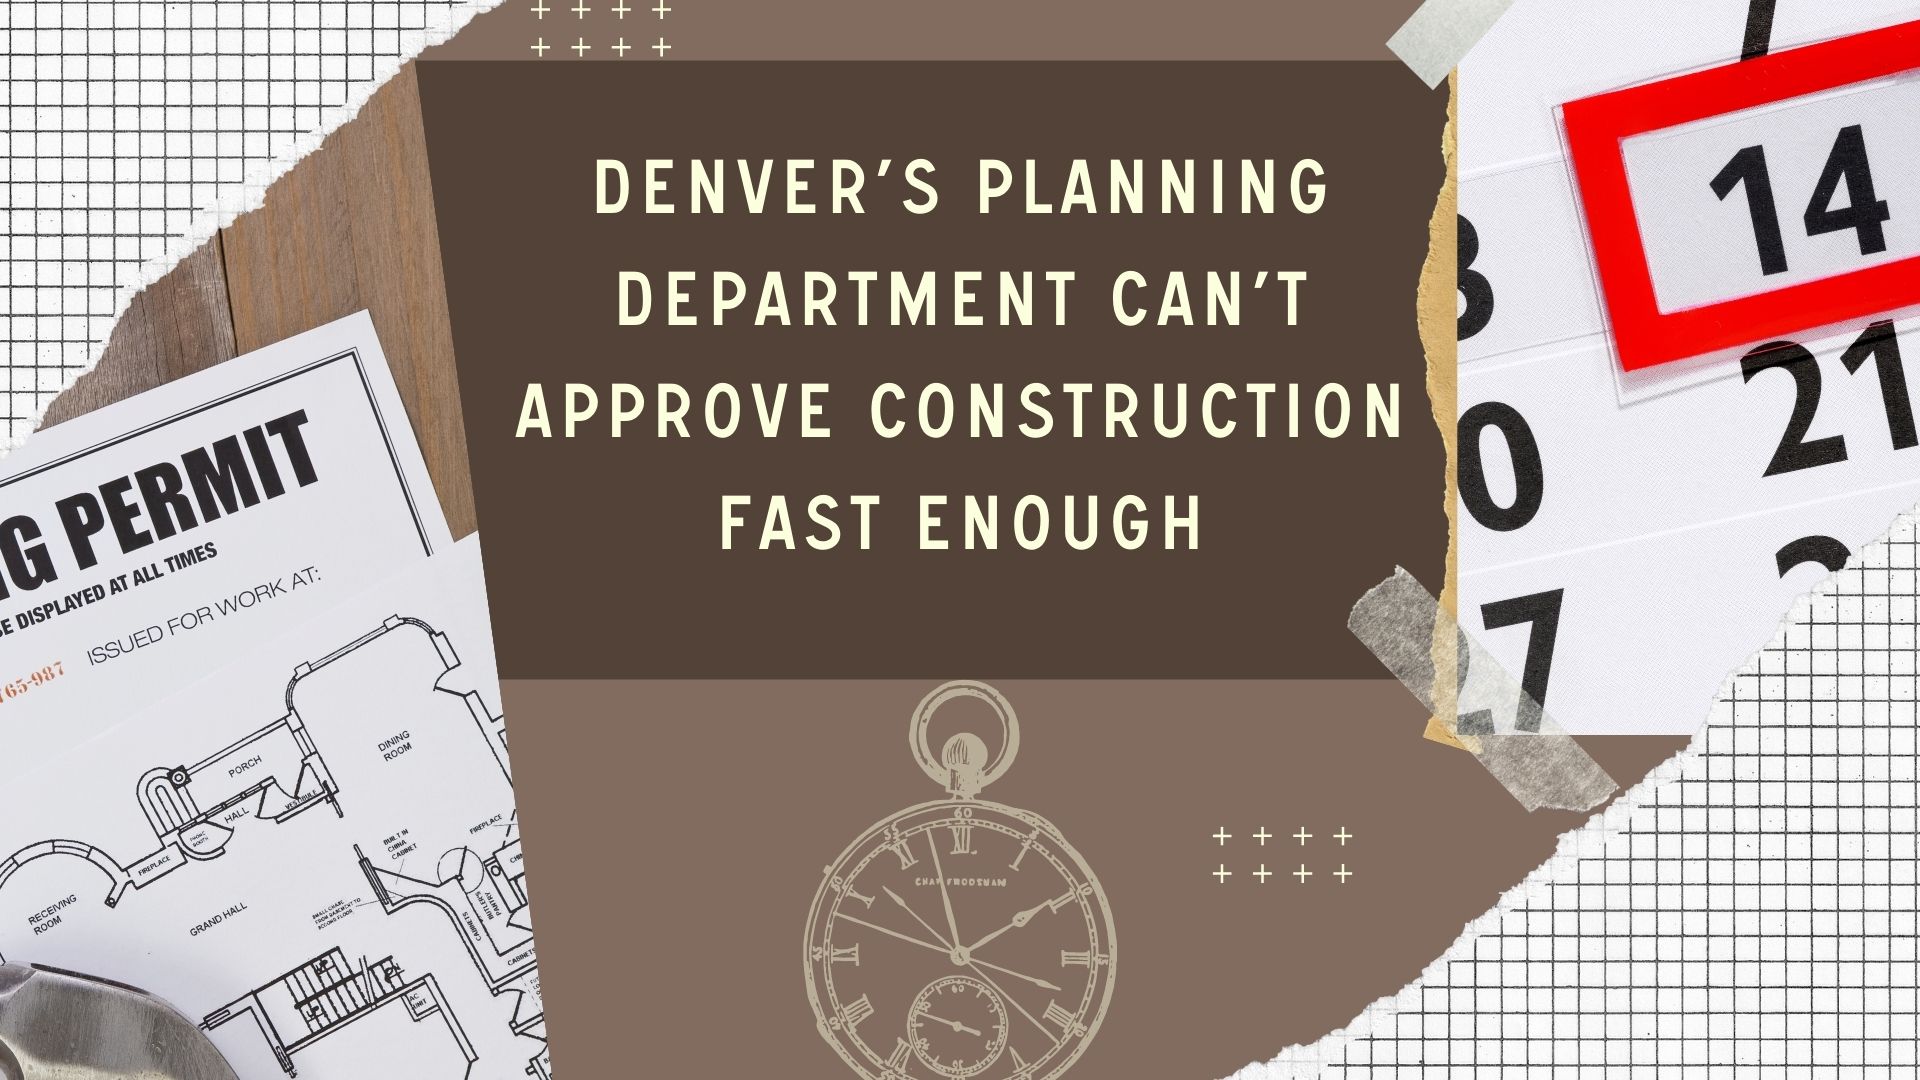 Sustainable Design Build - Denver’s Planning Department Can’t Approve Construction Fast Enough Commercial Construction